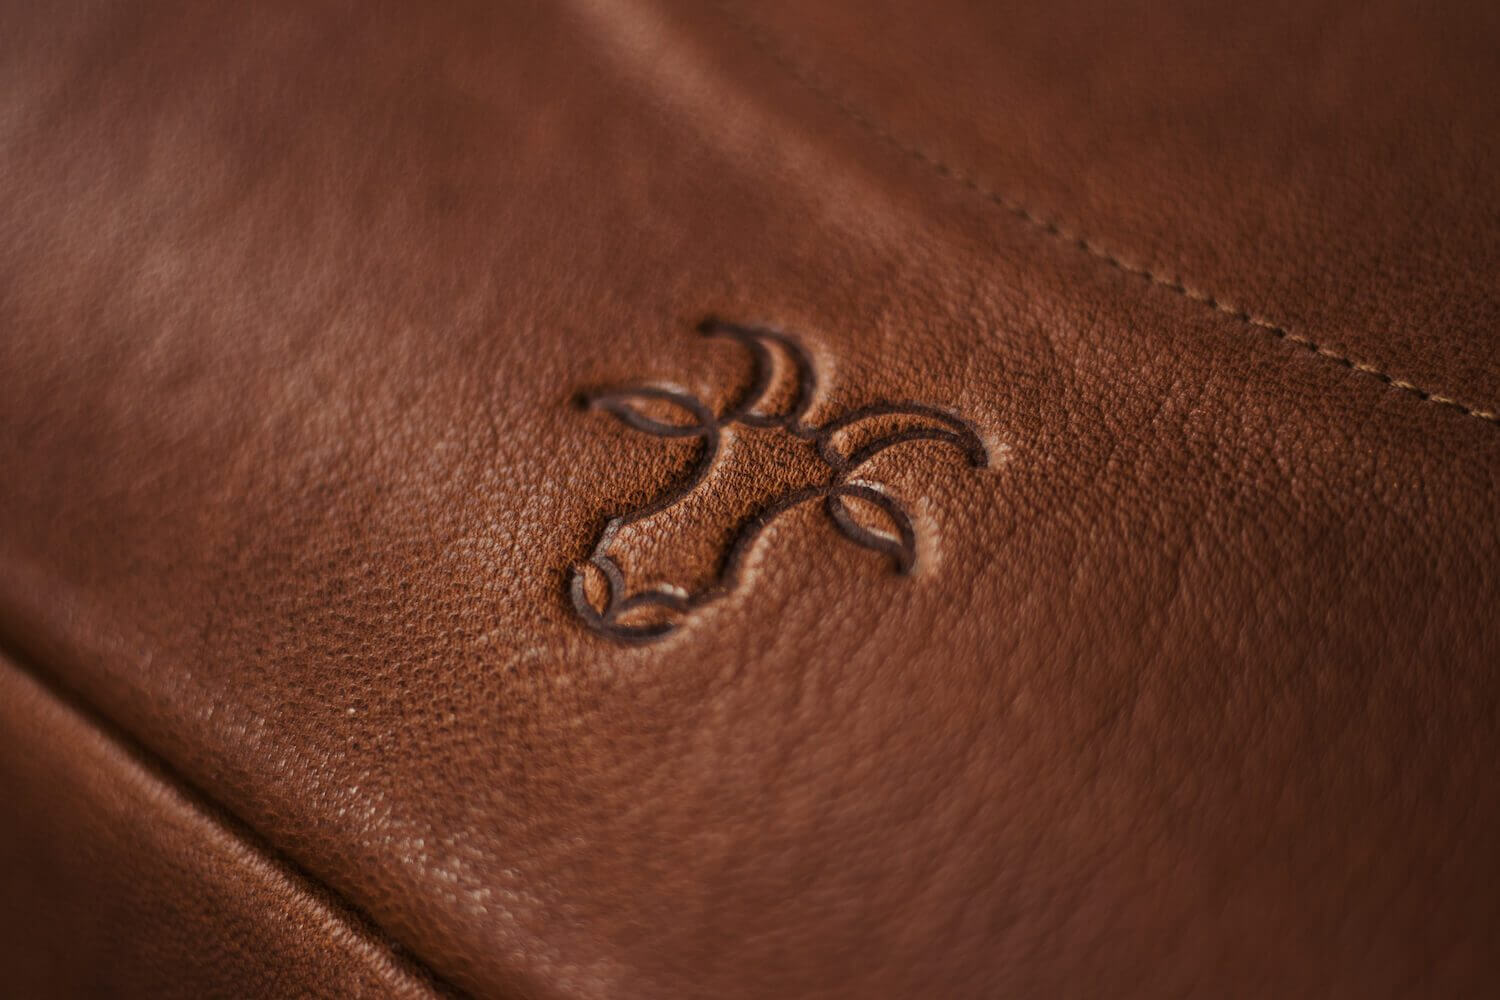 How to clean leather: a step-by-step guide